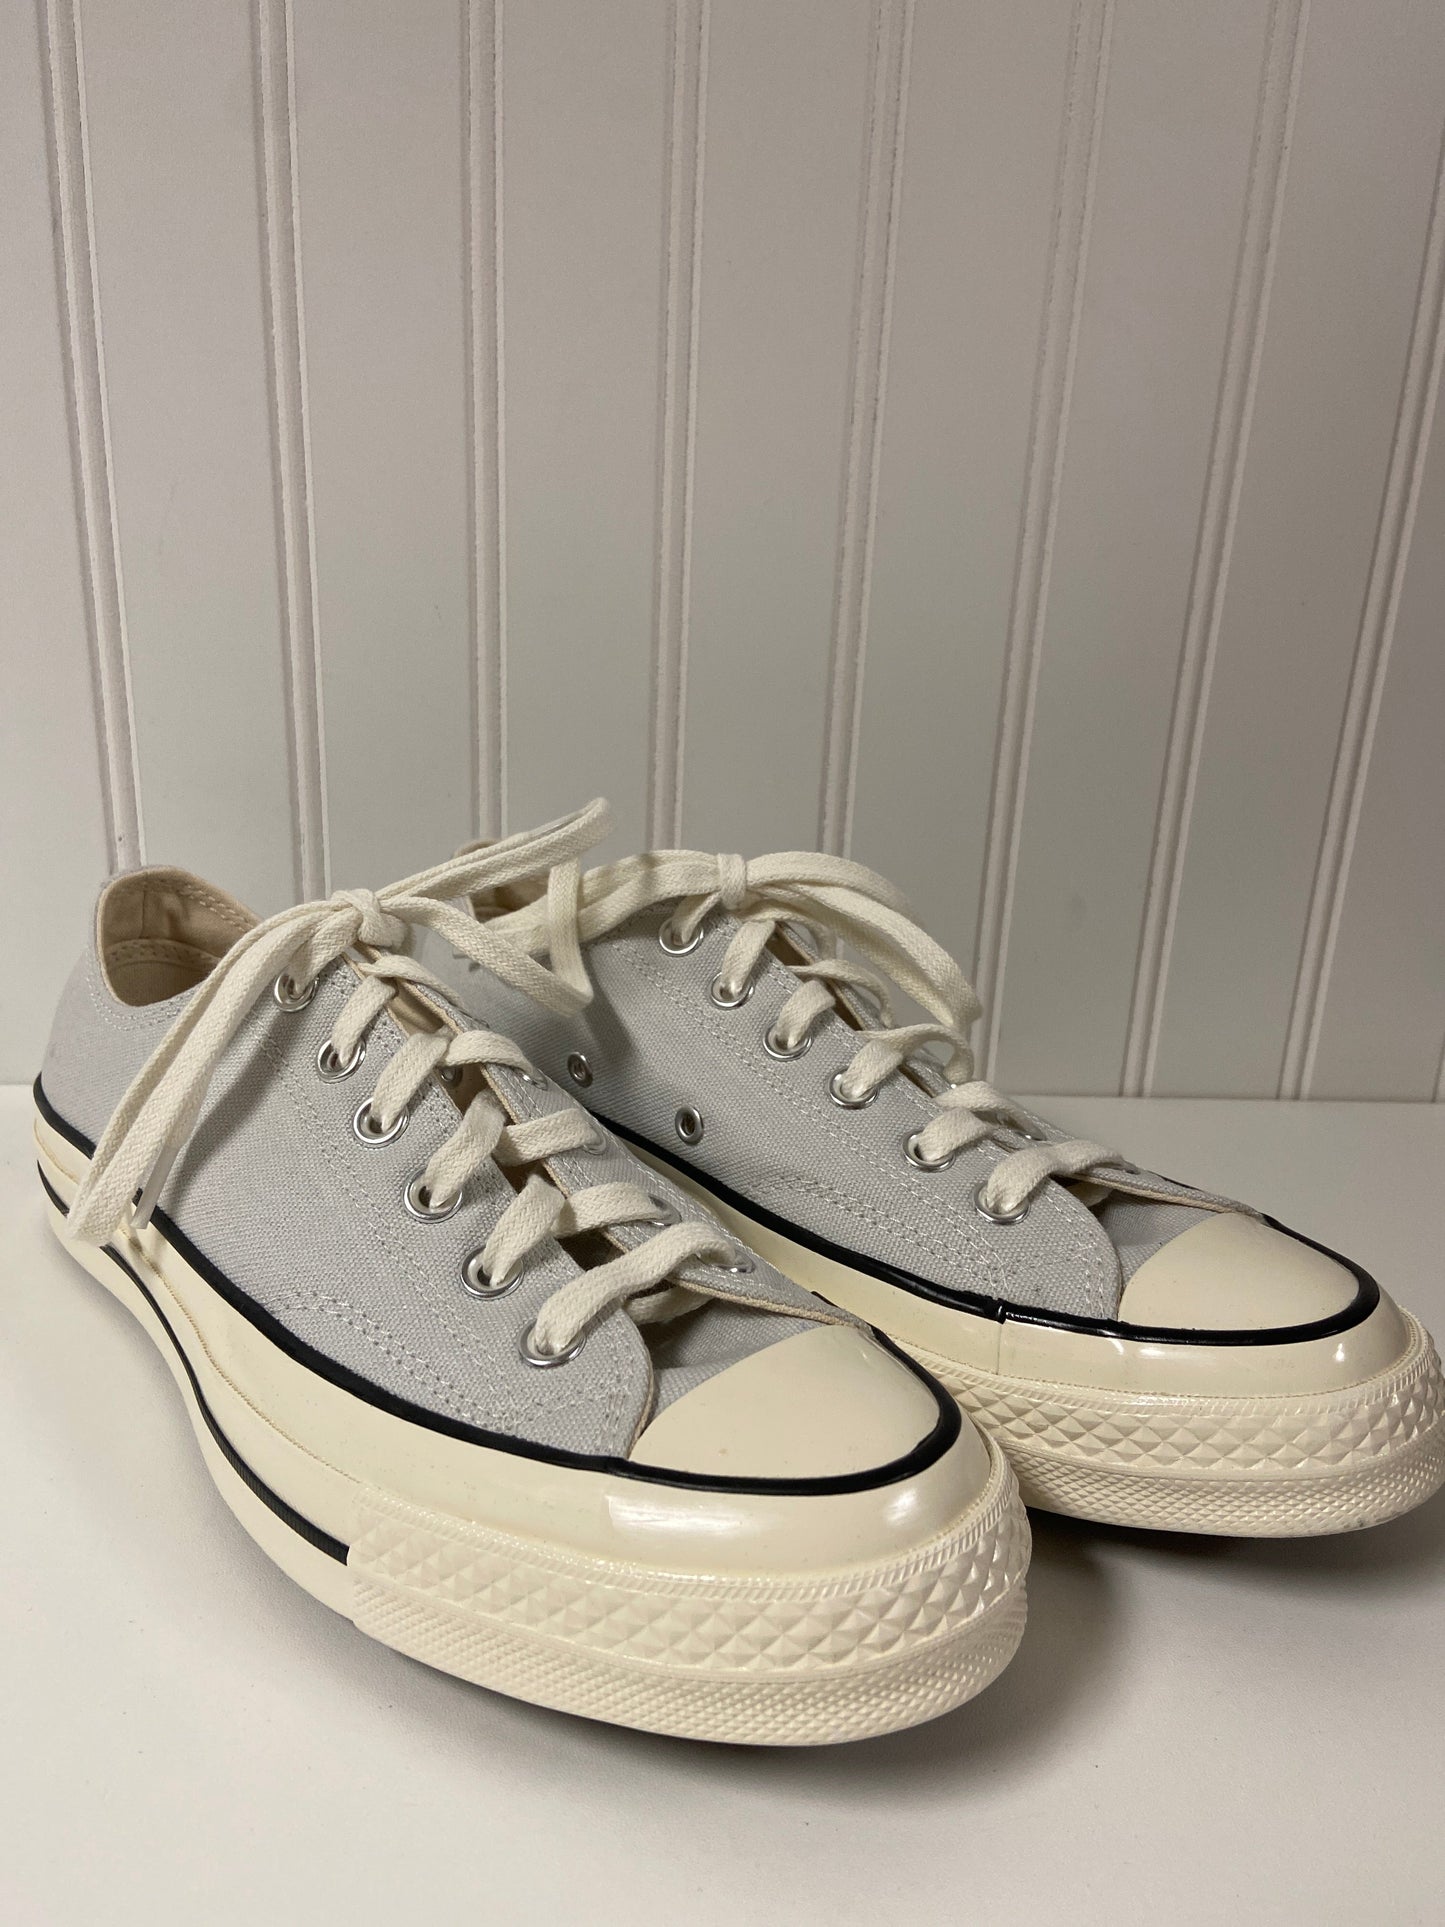 Grey Shoes Sneakers Converse, Size 8.5